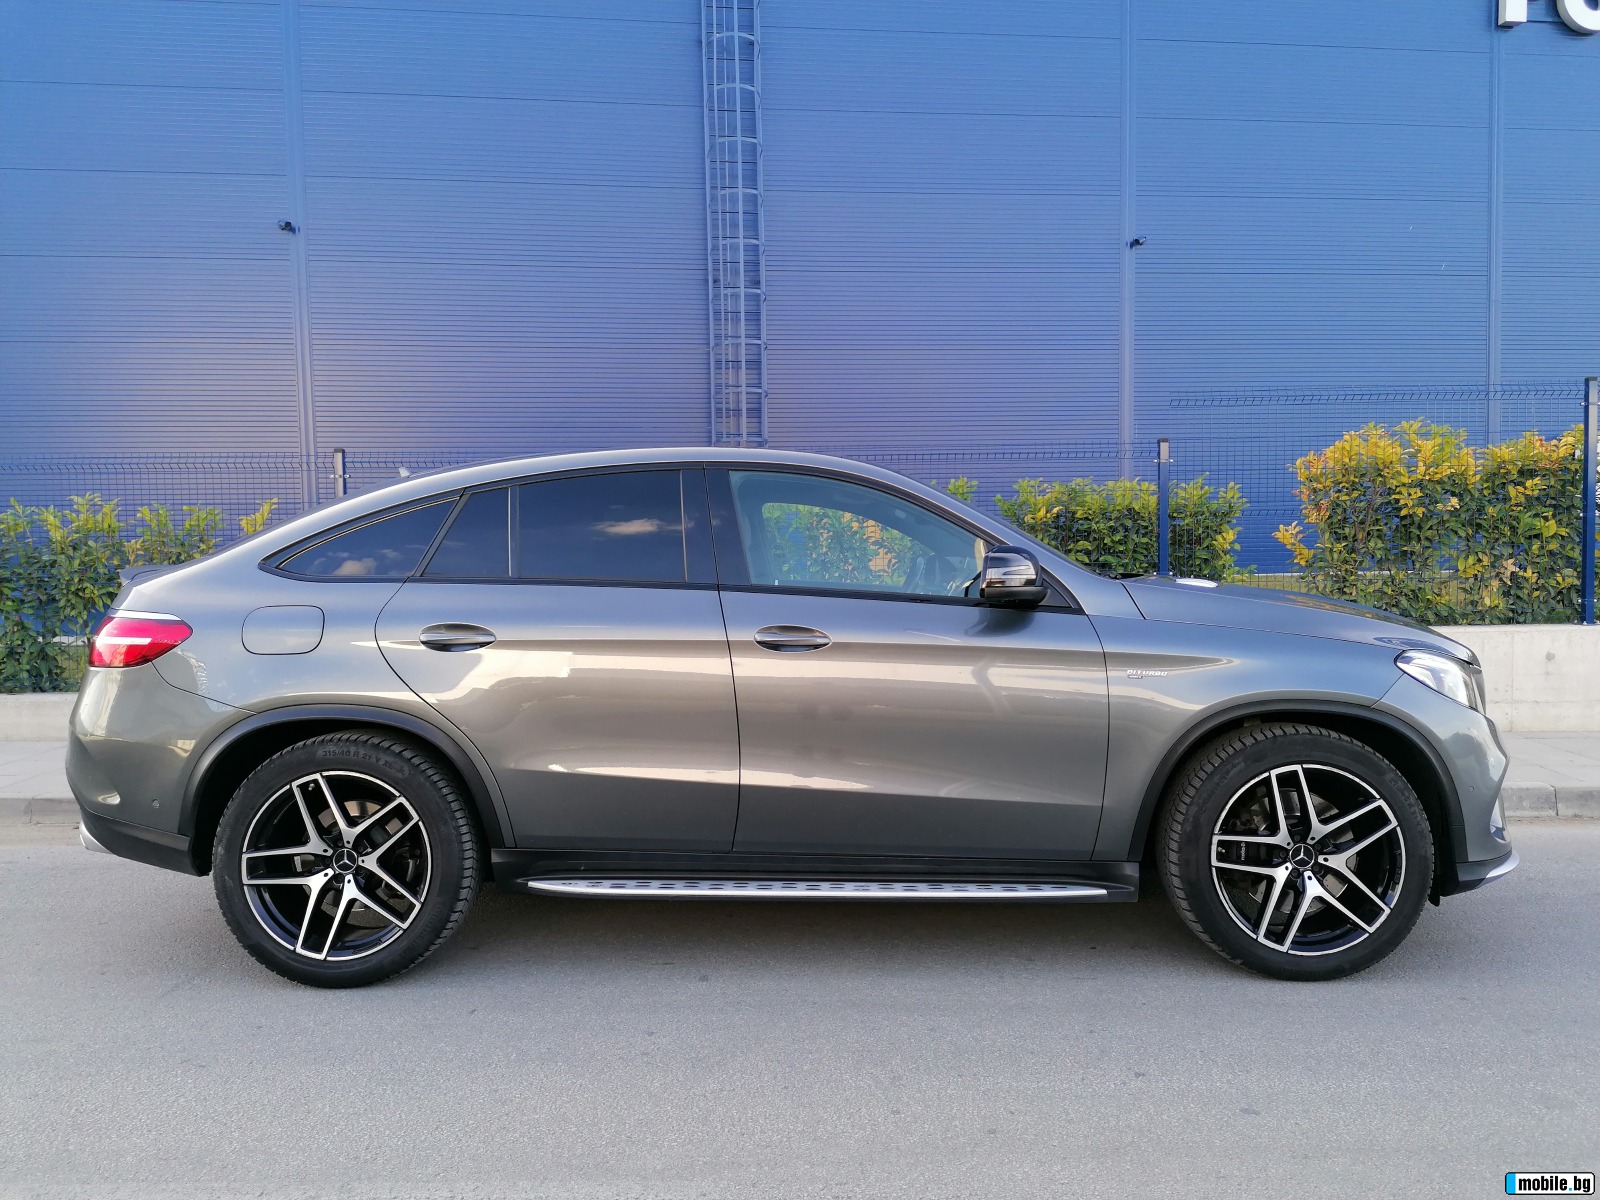 Mercedes-Benz GLE 43 AMG Coupe | Mobile.bg   6